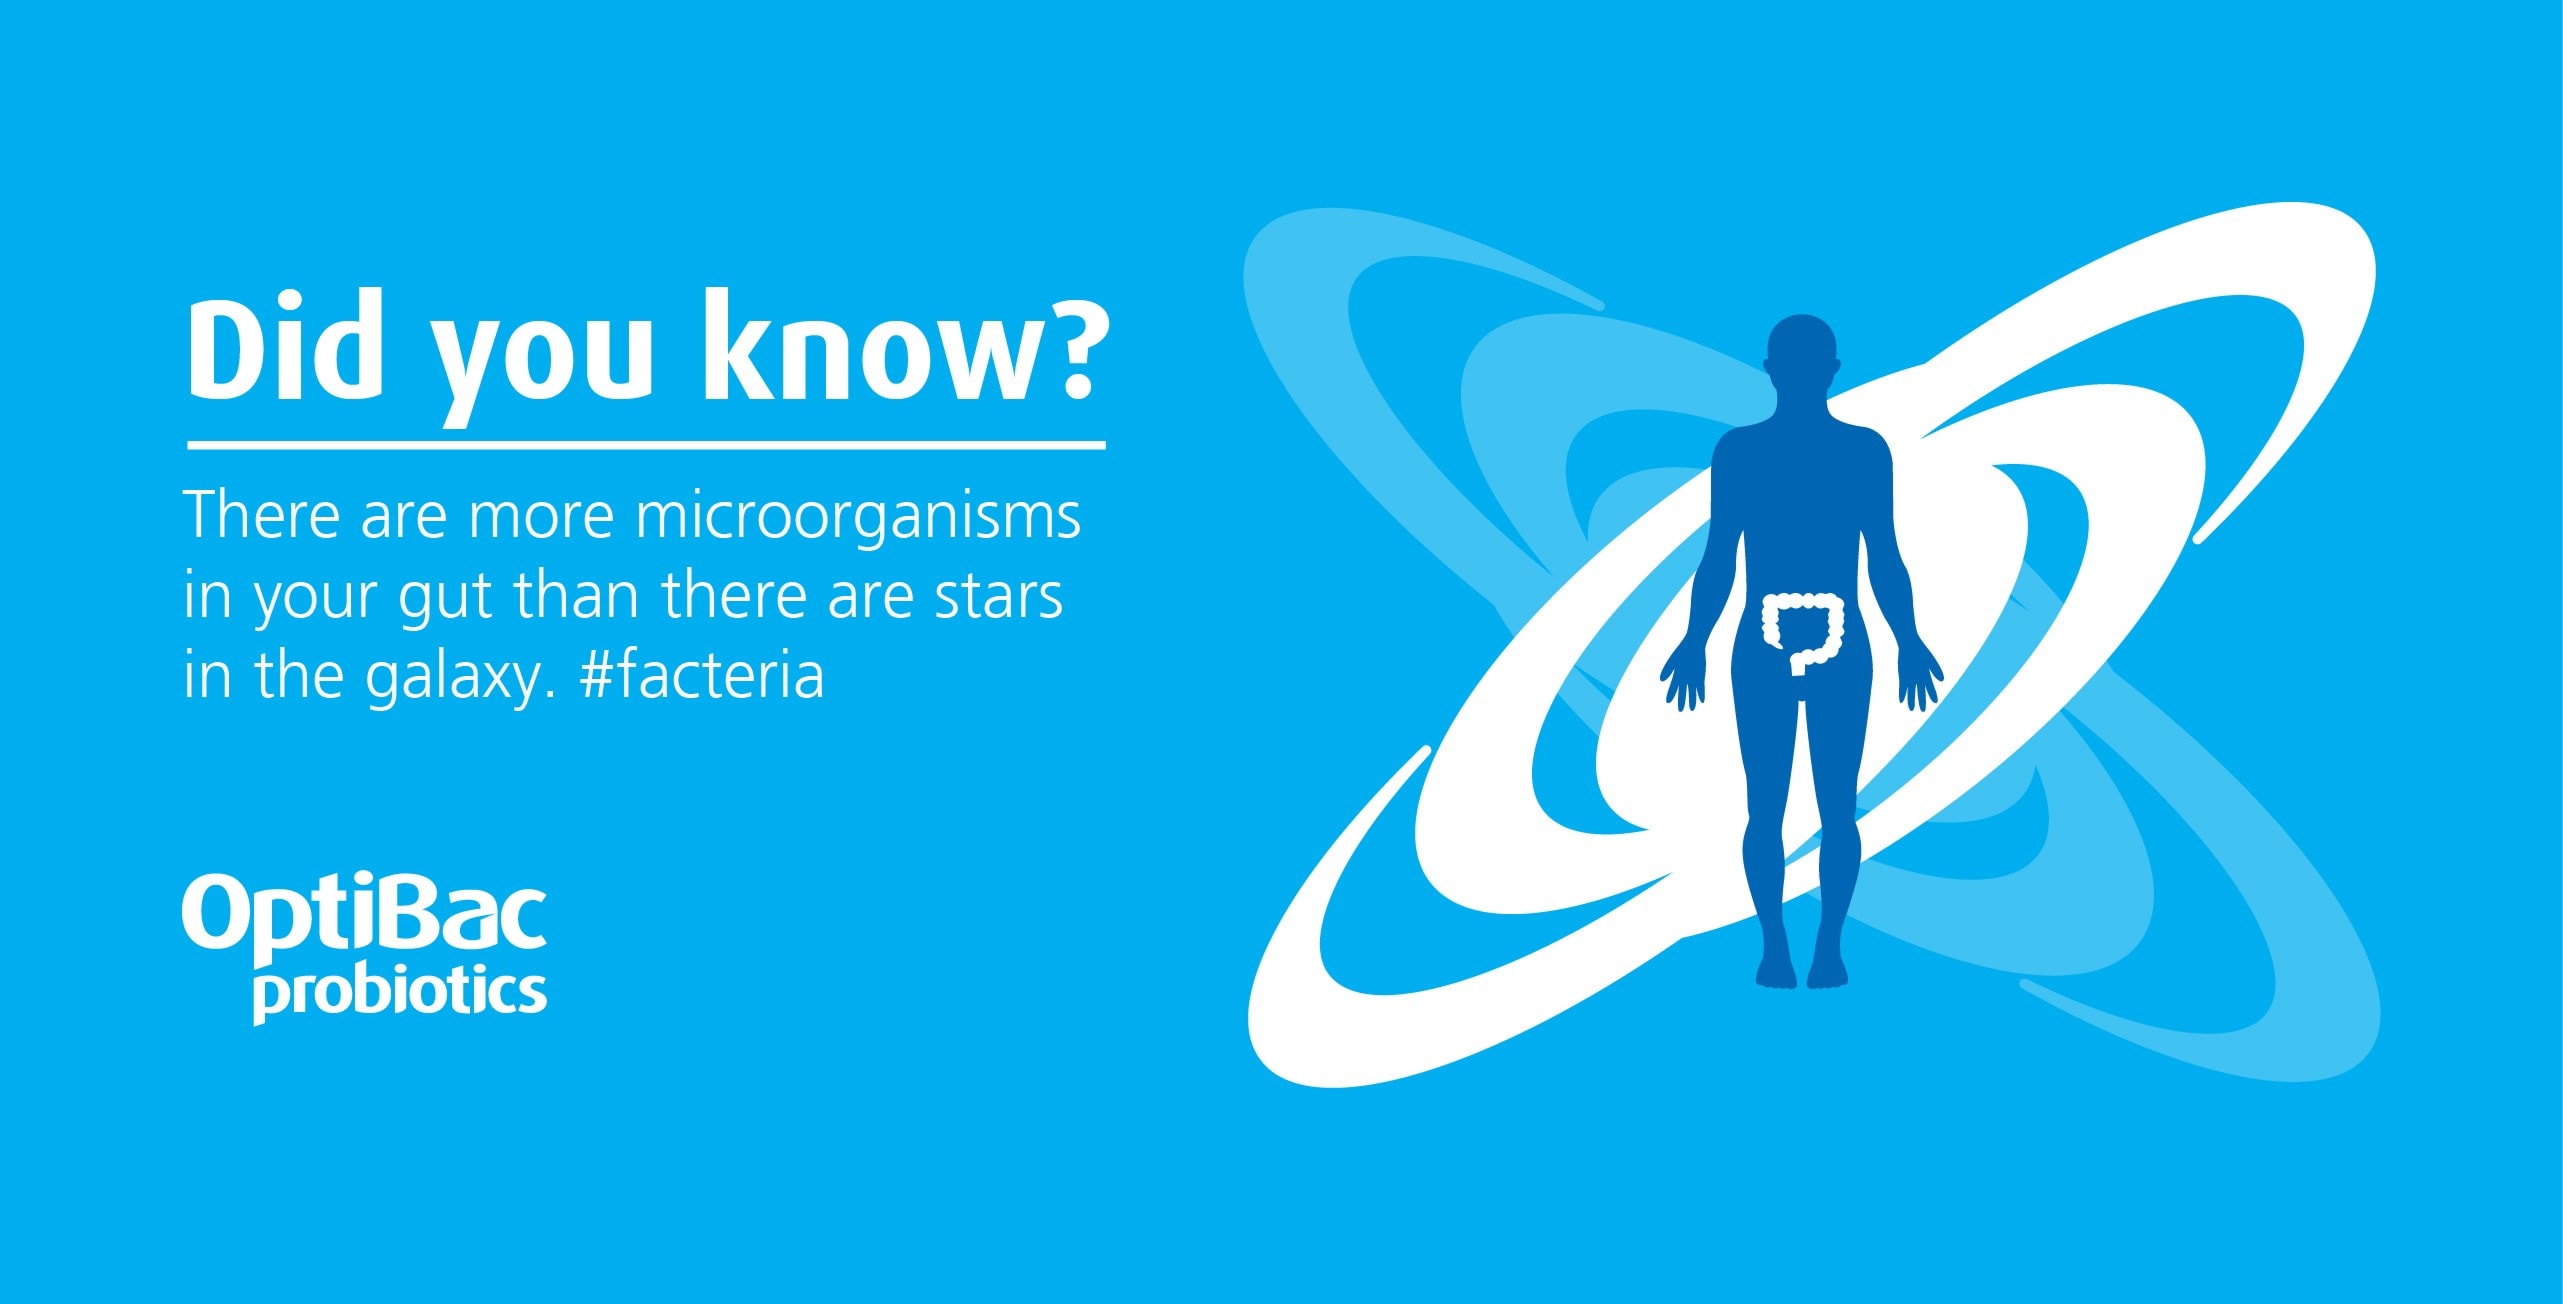 Fact about bacteria and the galaxy